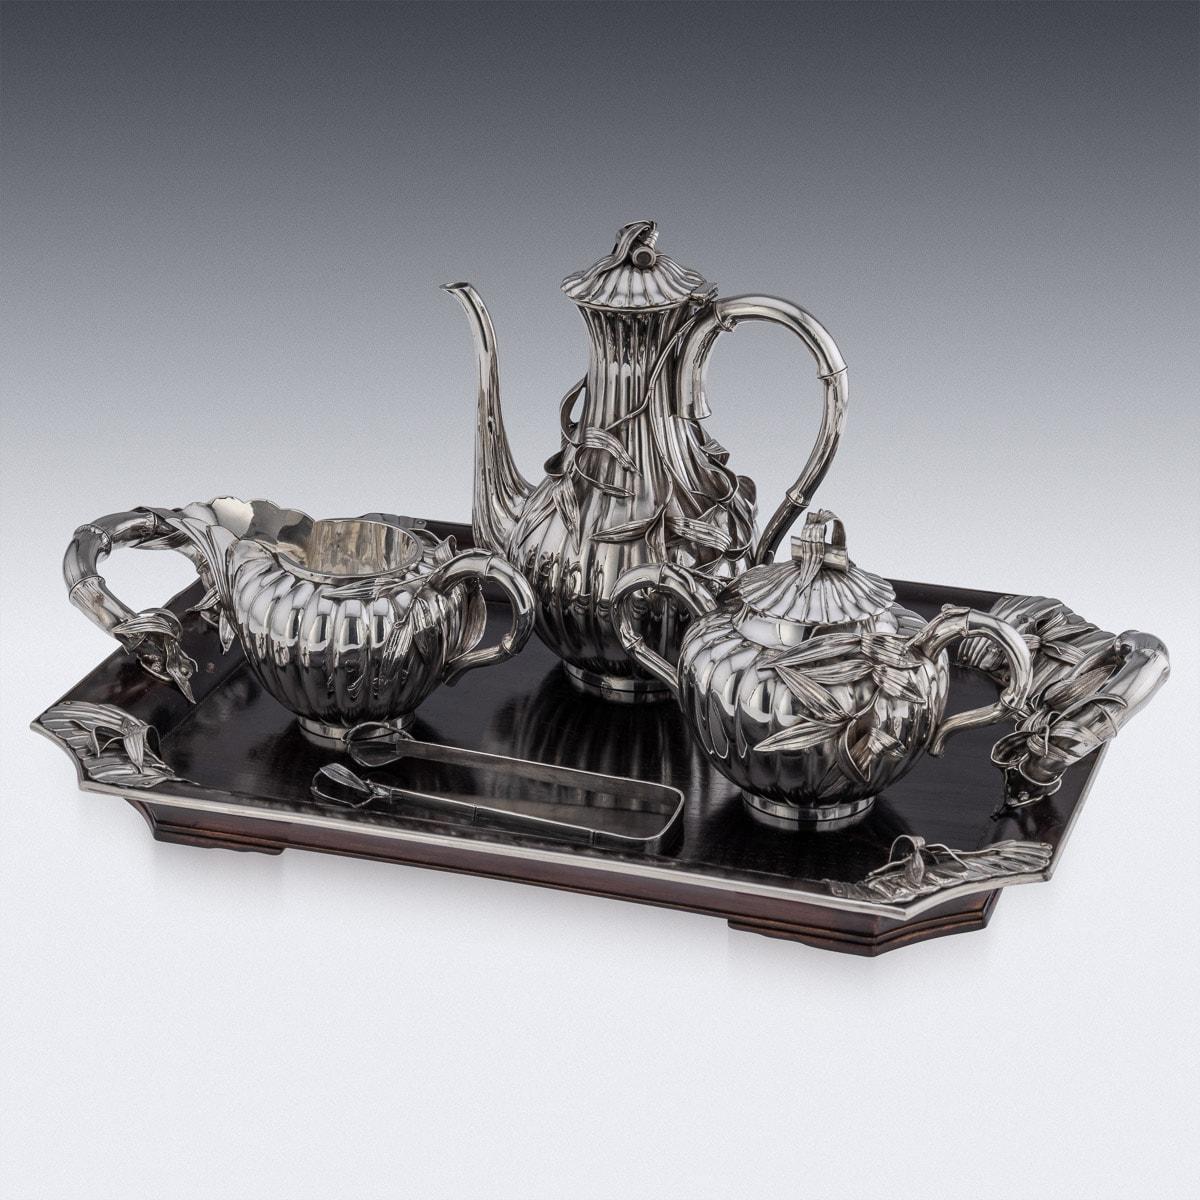 Antique early-20th Century Japanese Meiji period, solid silver coffee set with sugar tongs on wood serving tray, exceptional and magnificent quality, applied with bamboo leaves and bamboo c-form handles, on bolbous plain ground. Hallmarked with the